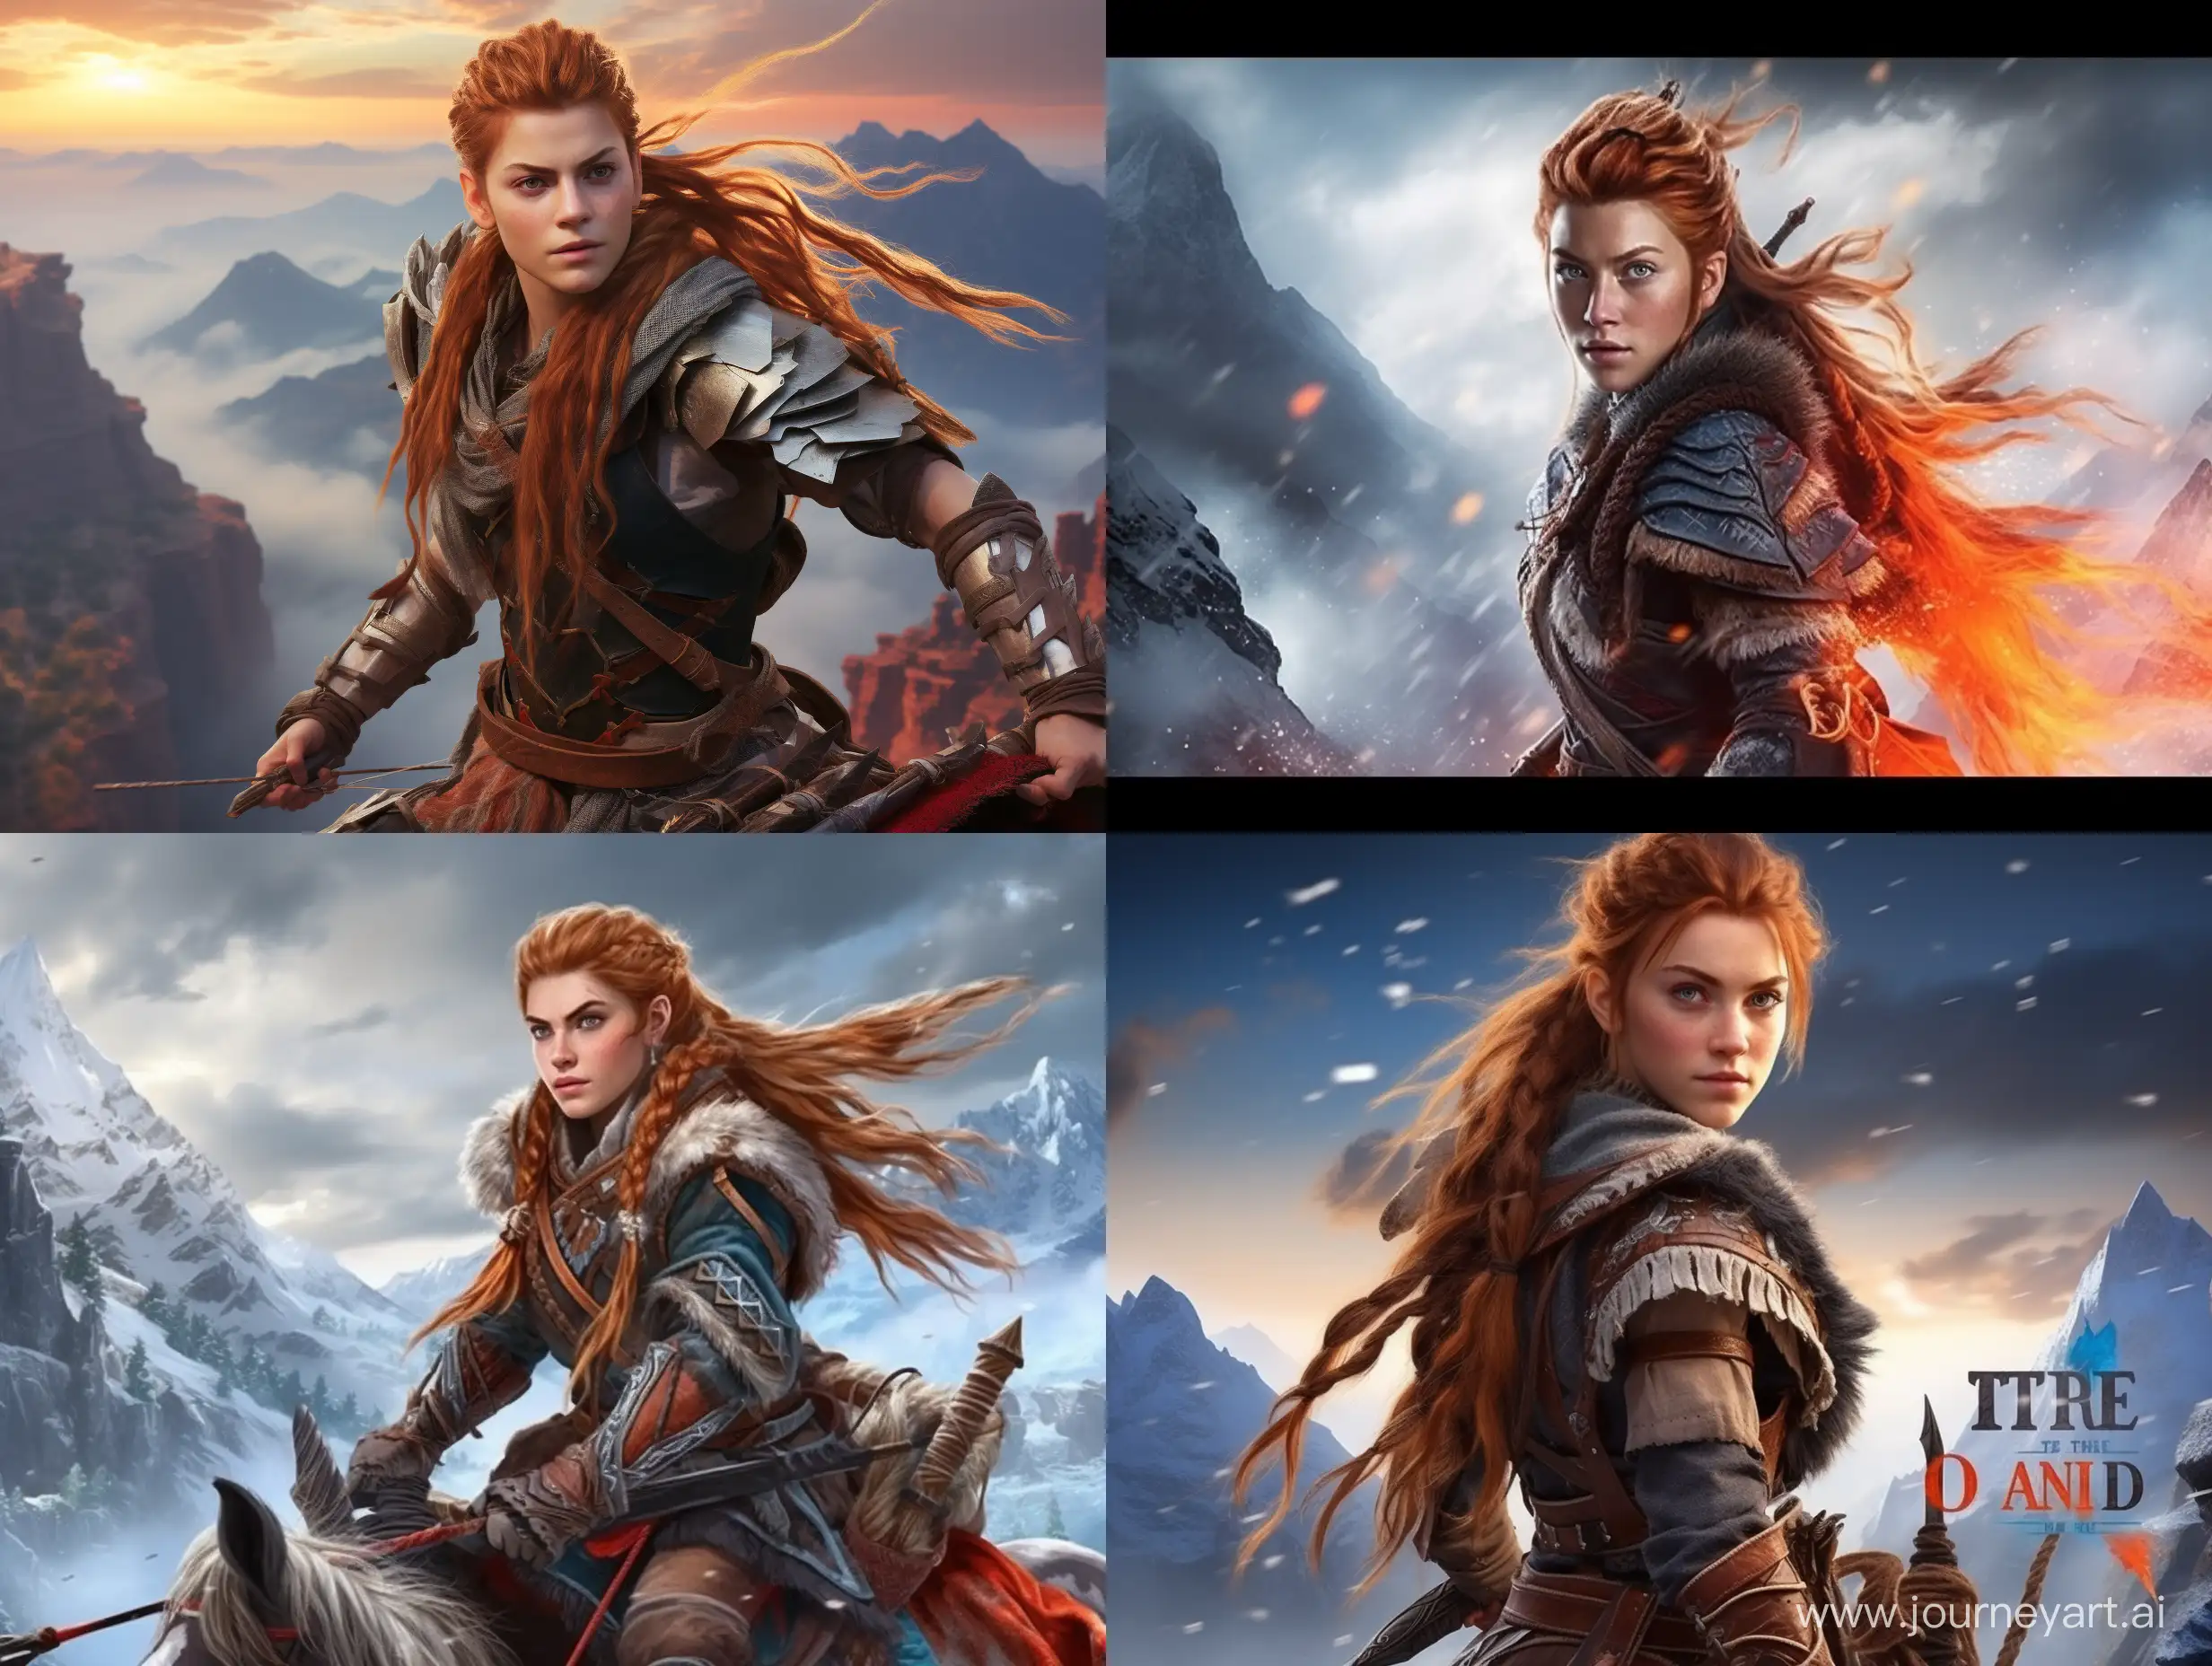 create a youtube thumbnail with Aloy from horizon forbidden west and titlle should be "Best GAME OF THE YEAR!"